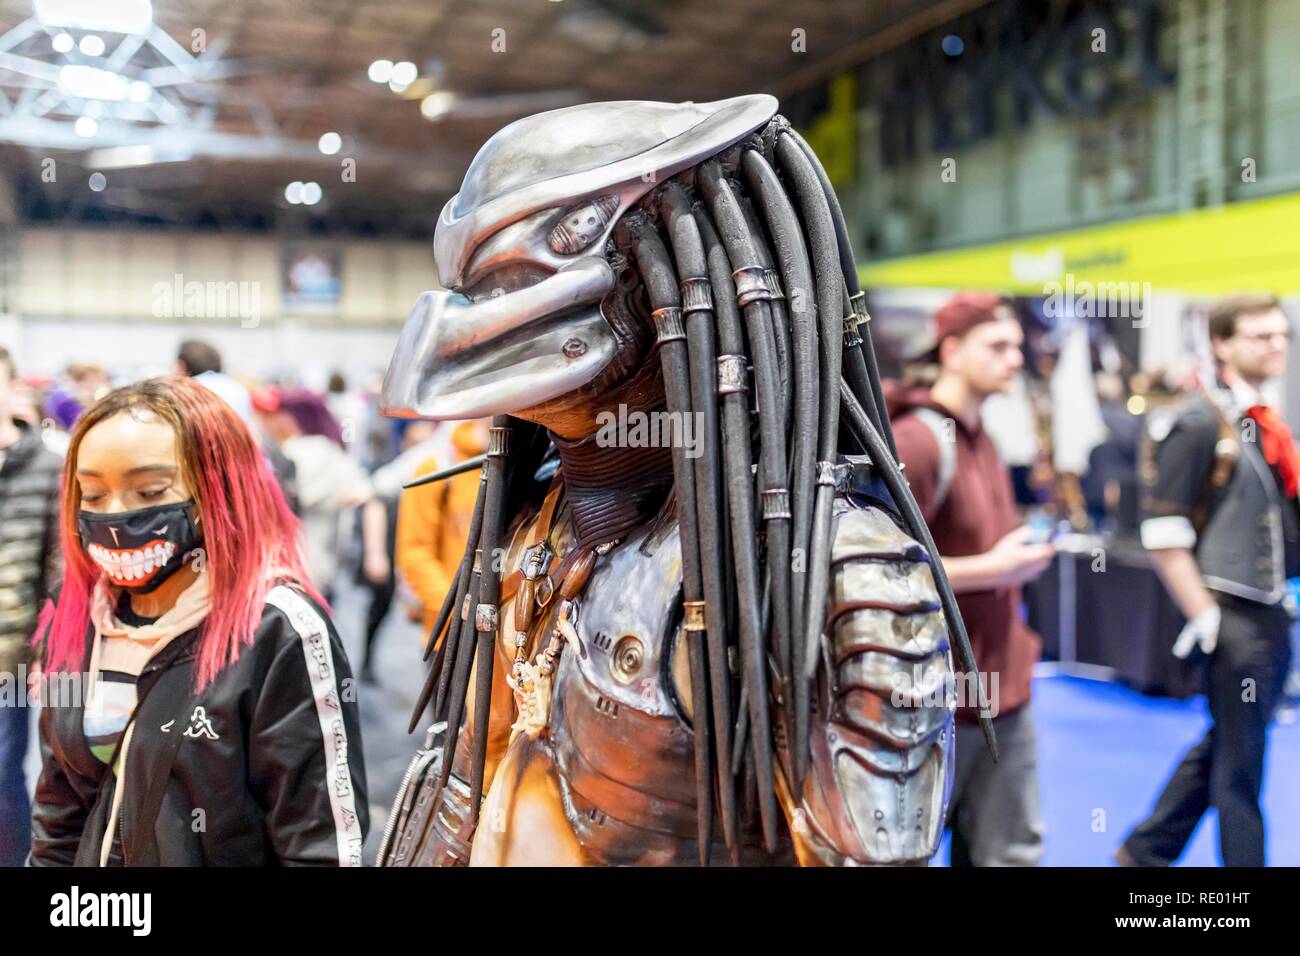 Birmingham, UK - March 17, 2018. Male comicon fan dressed as Twentieth Century Fox character, Predator in cosplay fancy dress at a comic convention. Stock Photo